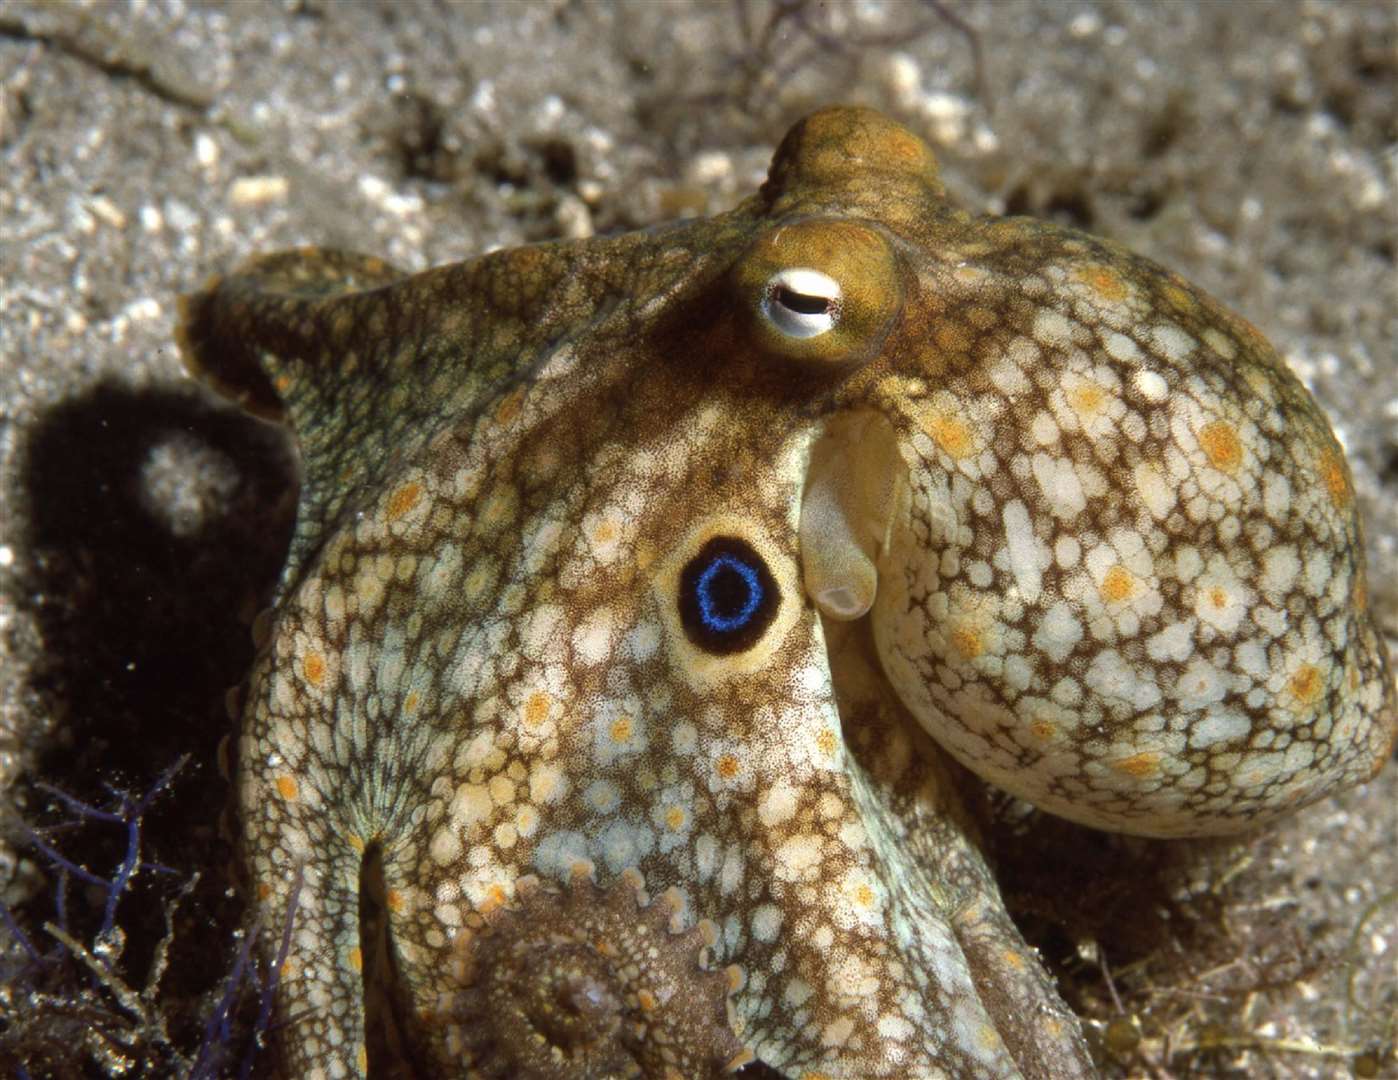 Octopuses are not capable of generating their own heat to counteract temperature changes (Roger T Hanlon/Marine Biological Laboratory/PA)